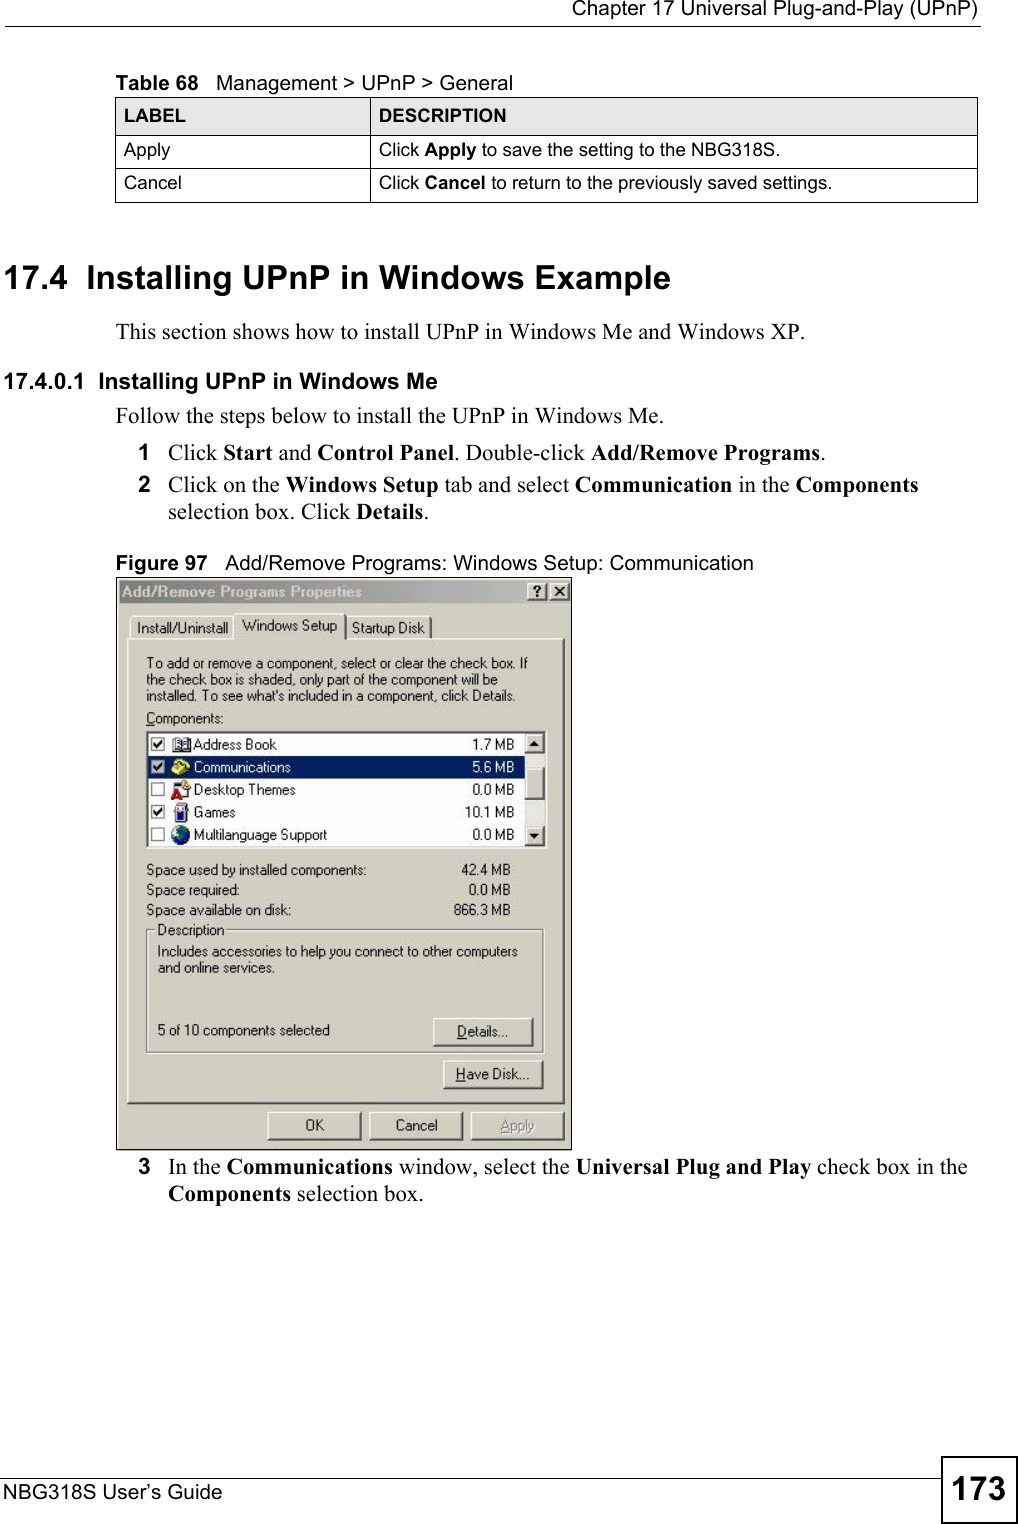  Chapter 17 Universal Plug-and-Play (UPnP)NBG318S User’s Guide 17317.4  Installing UPnP in Windows ExampleThis section shows how to install UPnP in Windows Me and Windows XP. 17.4.0.1  Installing UPnP in Windows MeFollow the steps below to install the UPnP in Windows Me. 1Click Start and Control Panel. Double-click Add/Remove Programs.2Click on the Windows Setup tab and select Communication in the Components selection box. Click Details. Figure 97   Add/Remove Programs: Windows Setup: Communication 3In the Communications window, select the Universal Plug and Play check box in the Components selection box. Apply Click Apply to save the setting to the NBG318S.Cancel Click Cancel to return to the previously saved settings.Table 68   Management &gt; UPnP &gt; GeneralLABEL DESCRIPTION